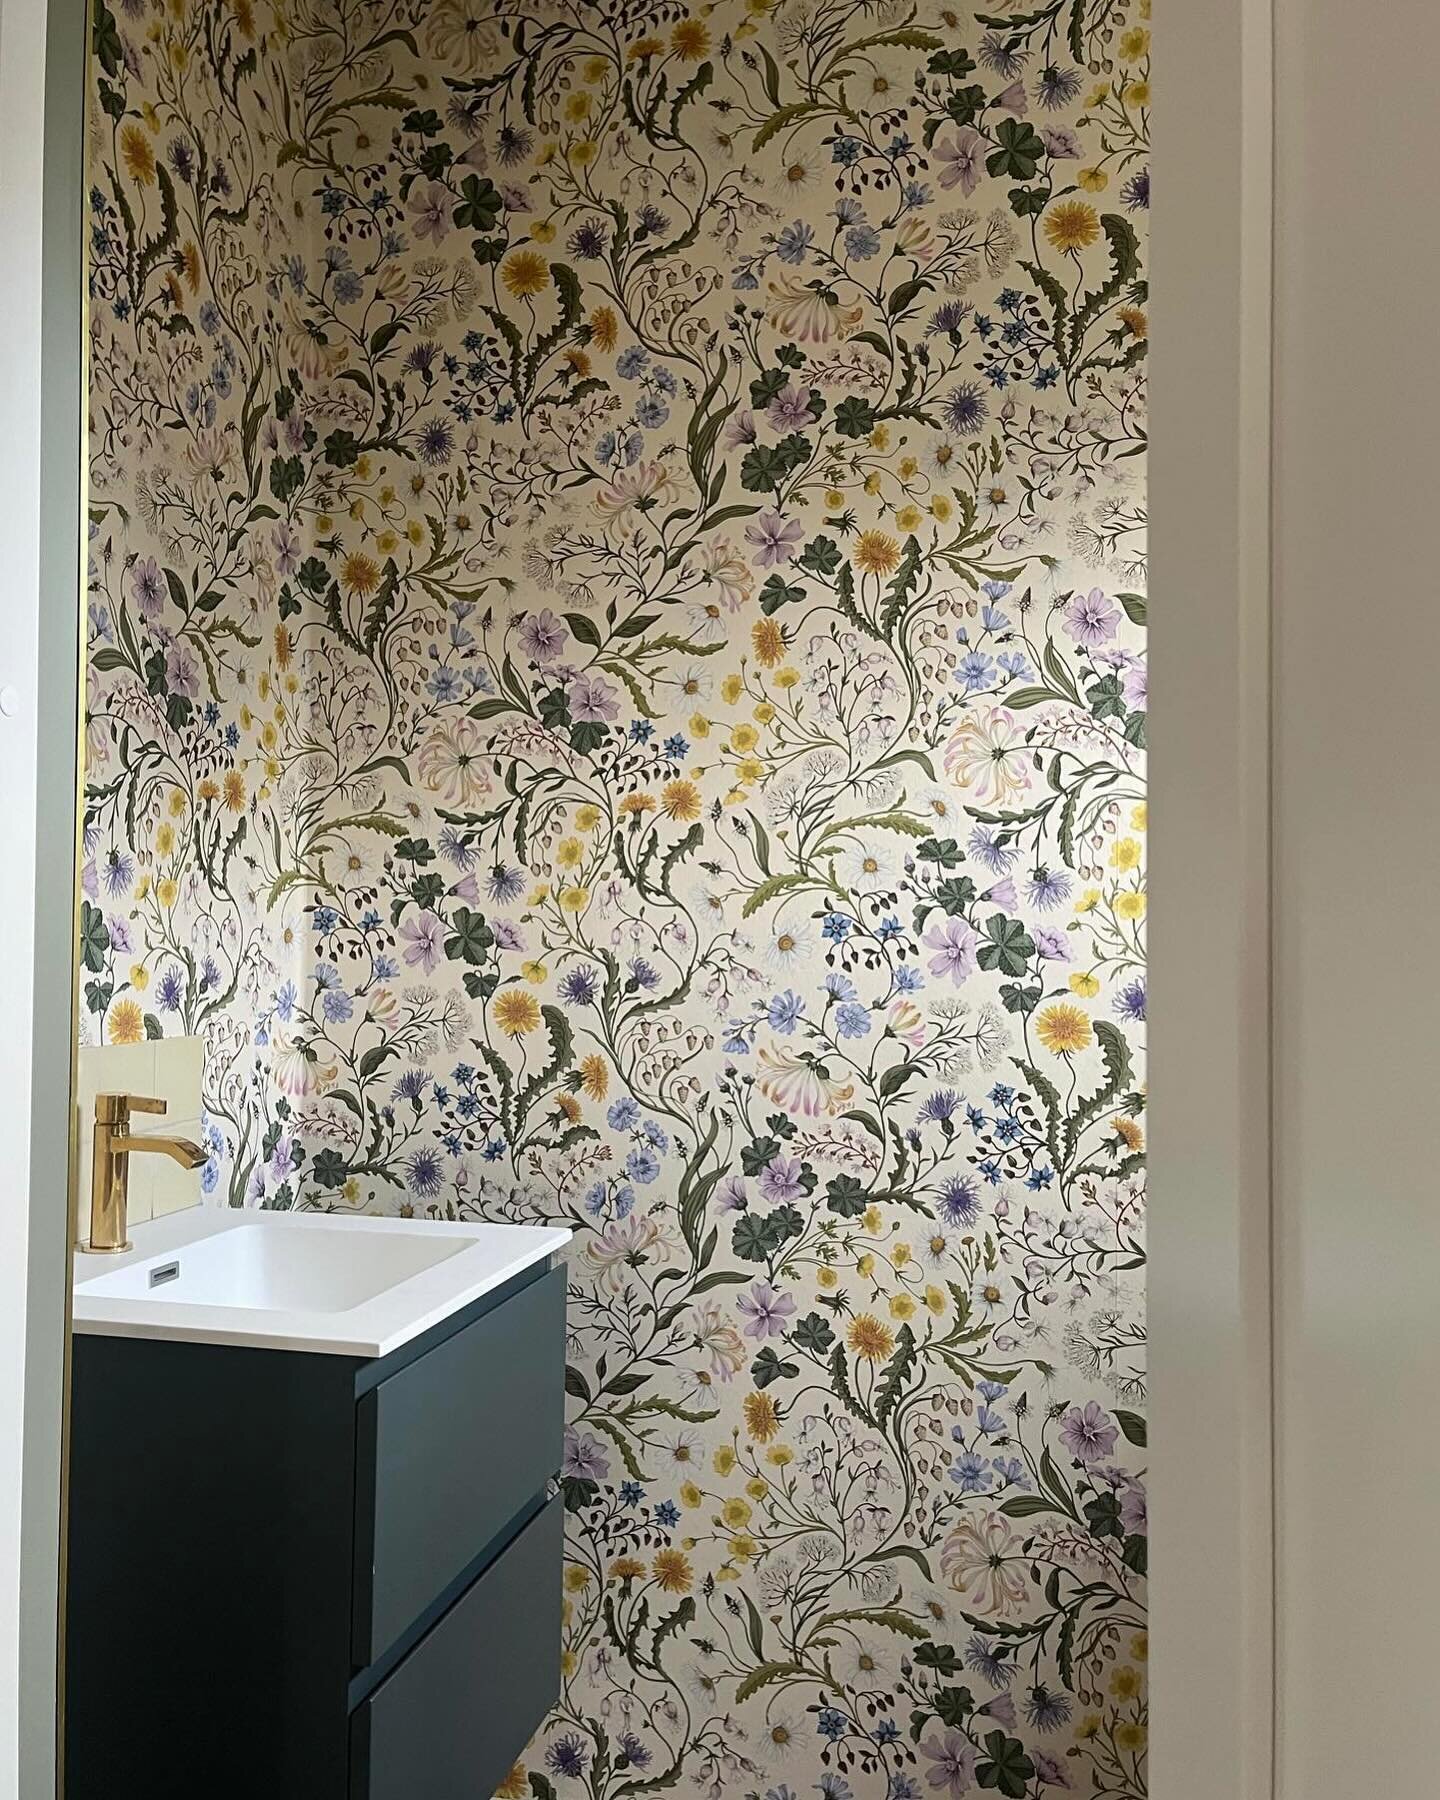 A contemporary space for a Scandinavian home, using our most popular Lost Garden design. I love seeing how customers incorporate my wallpaper into their homes. Paired with brass finishes and a pop of dark teal.

Thank you @hellybell for the photos of